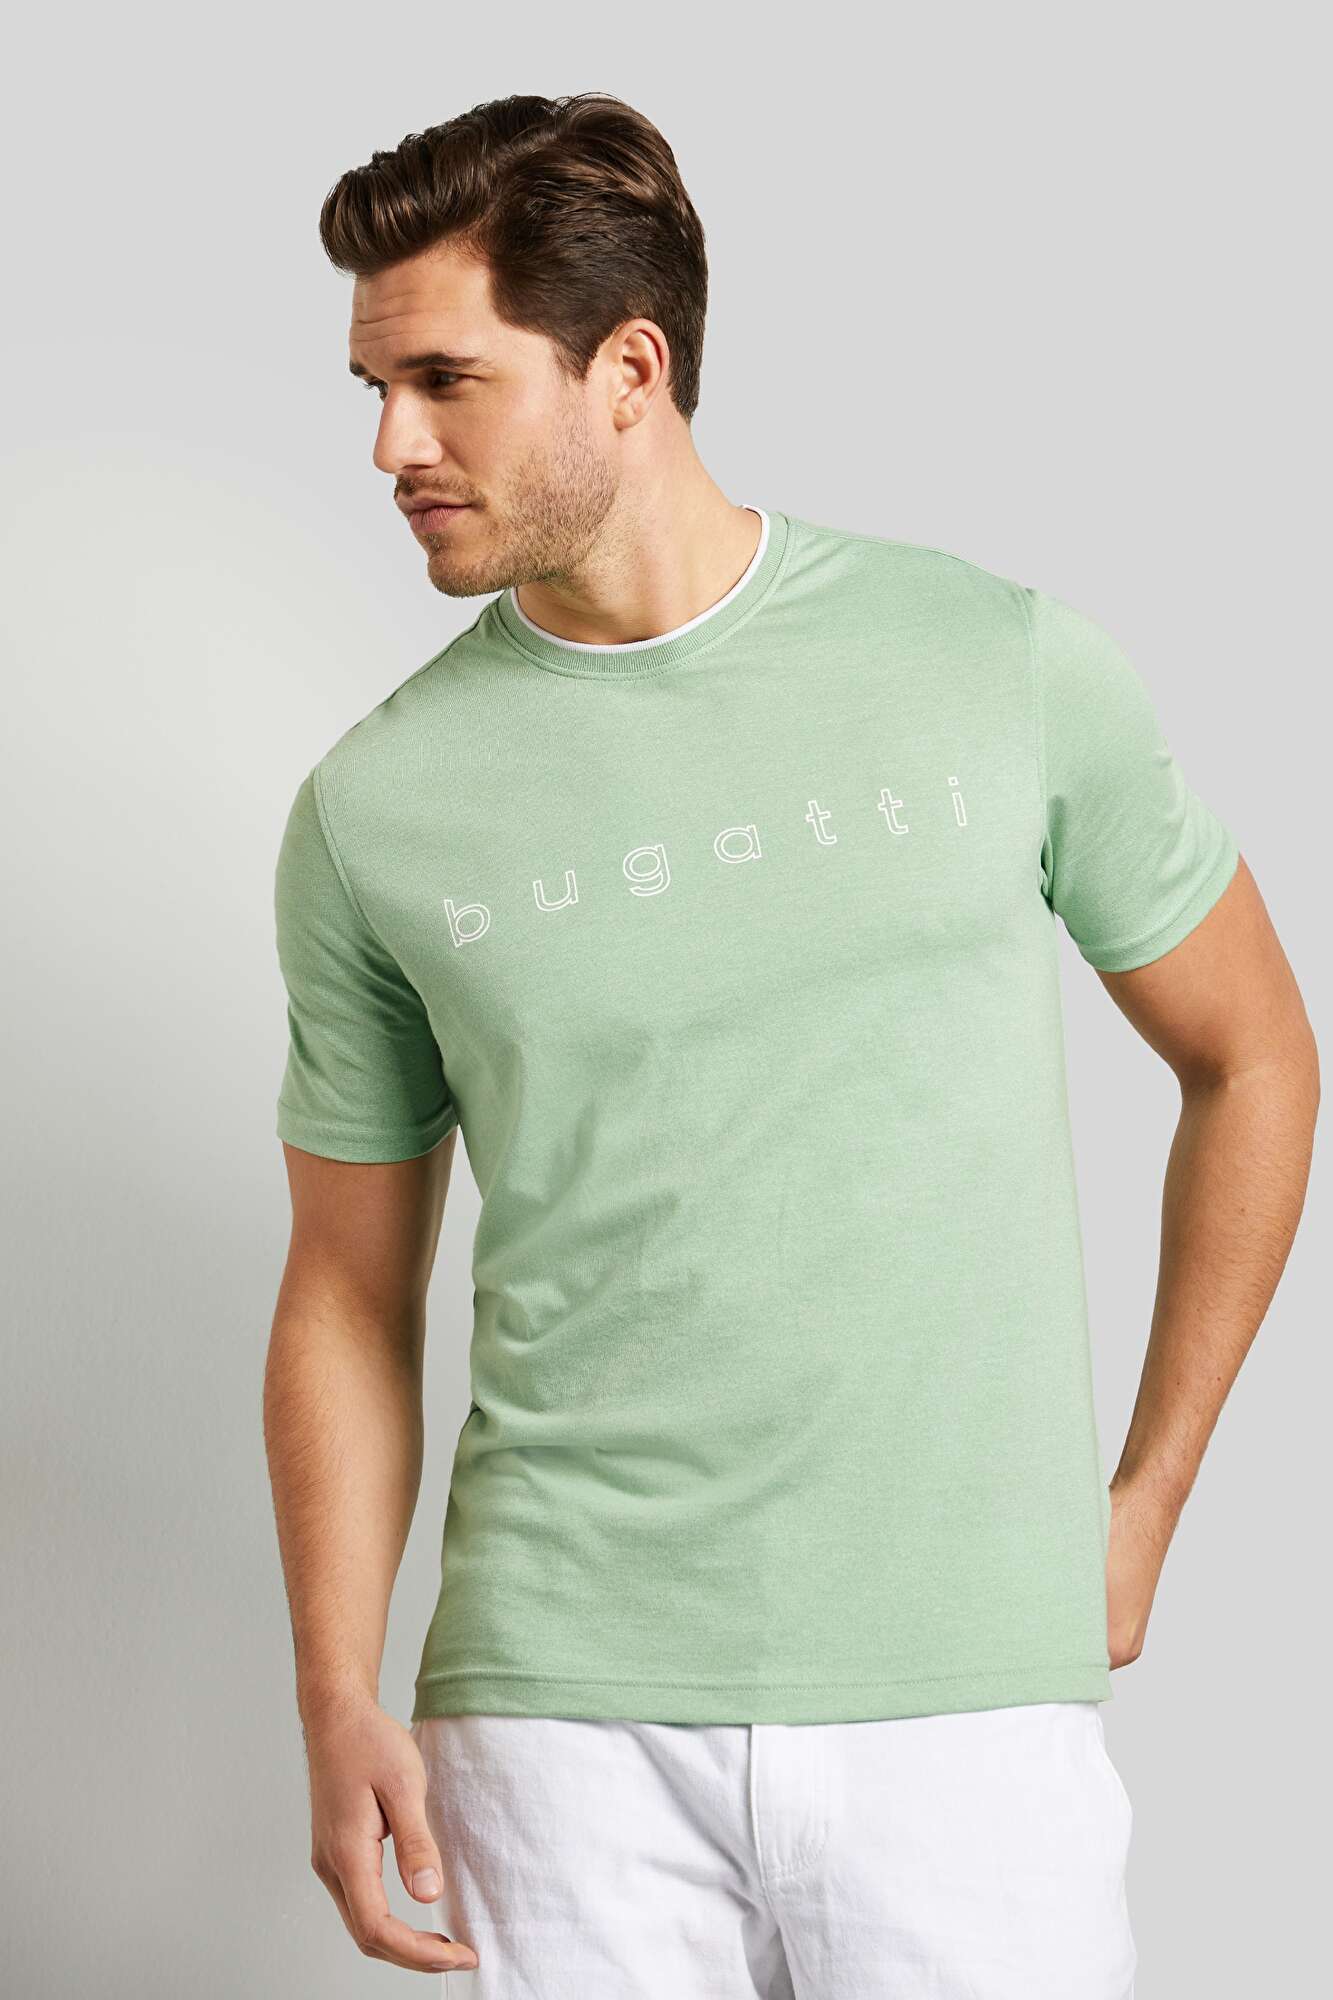 bugatti T-shirt stylish with contrasting in the stripes mint collar along |